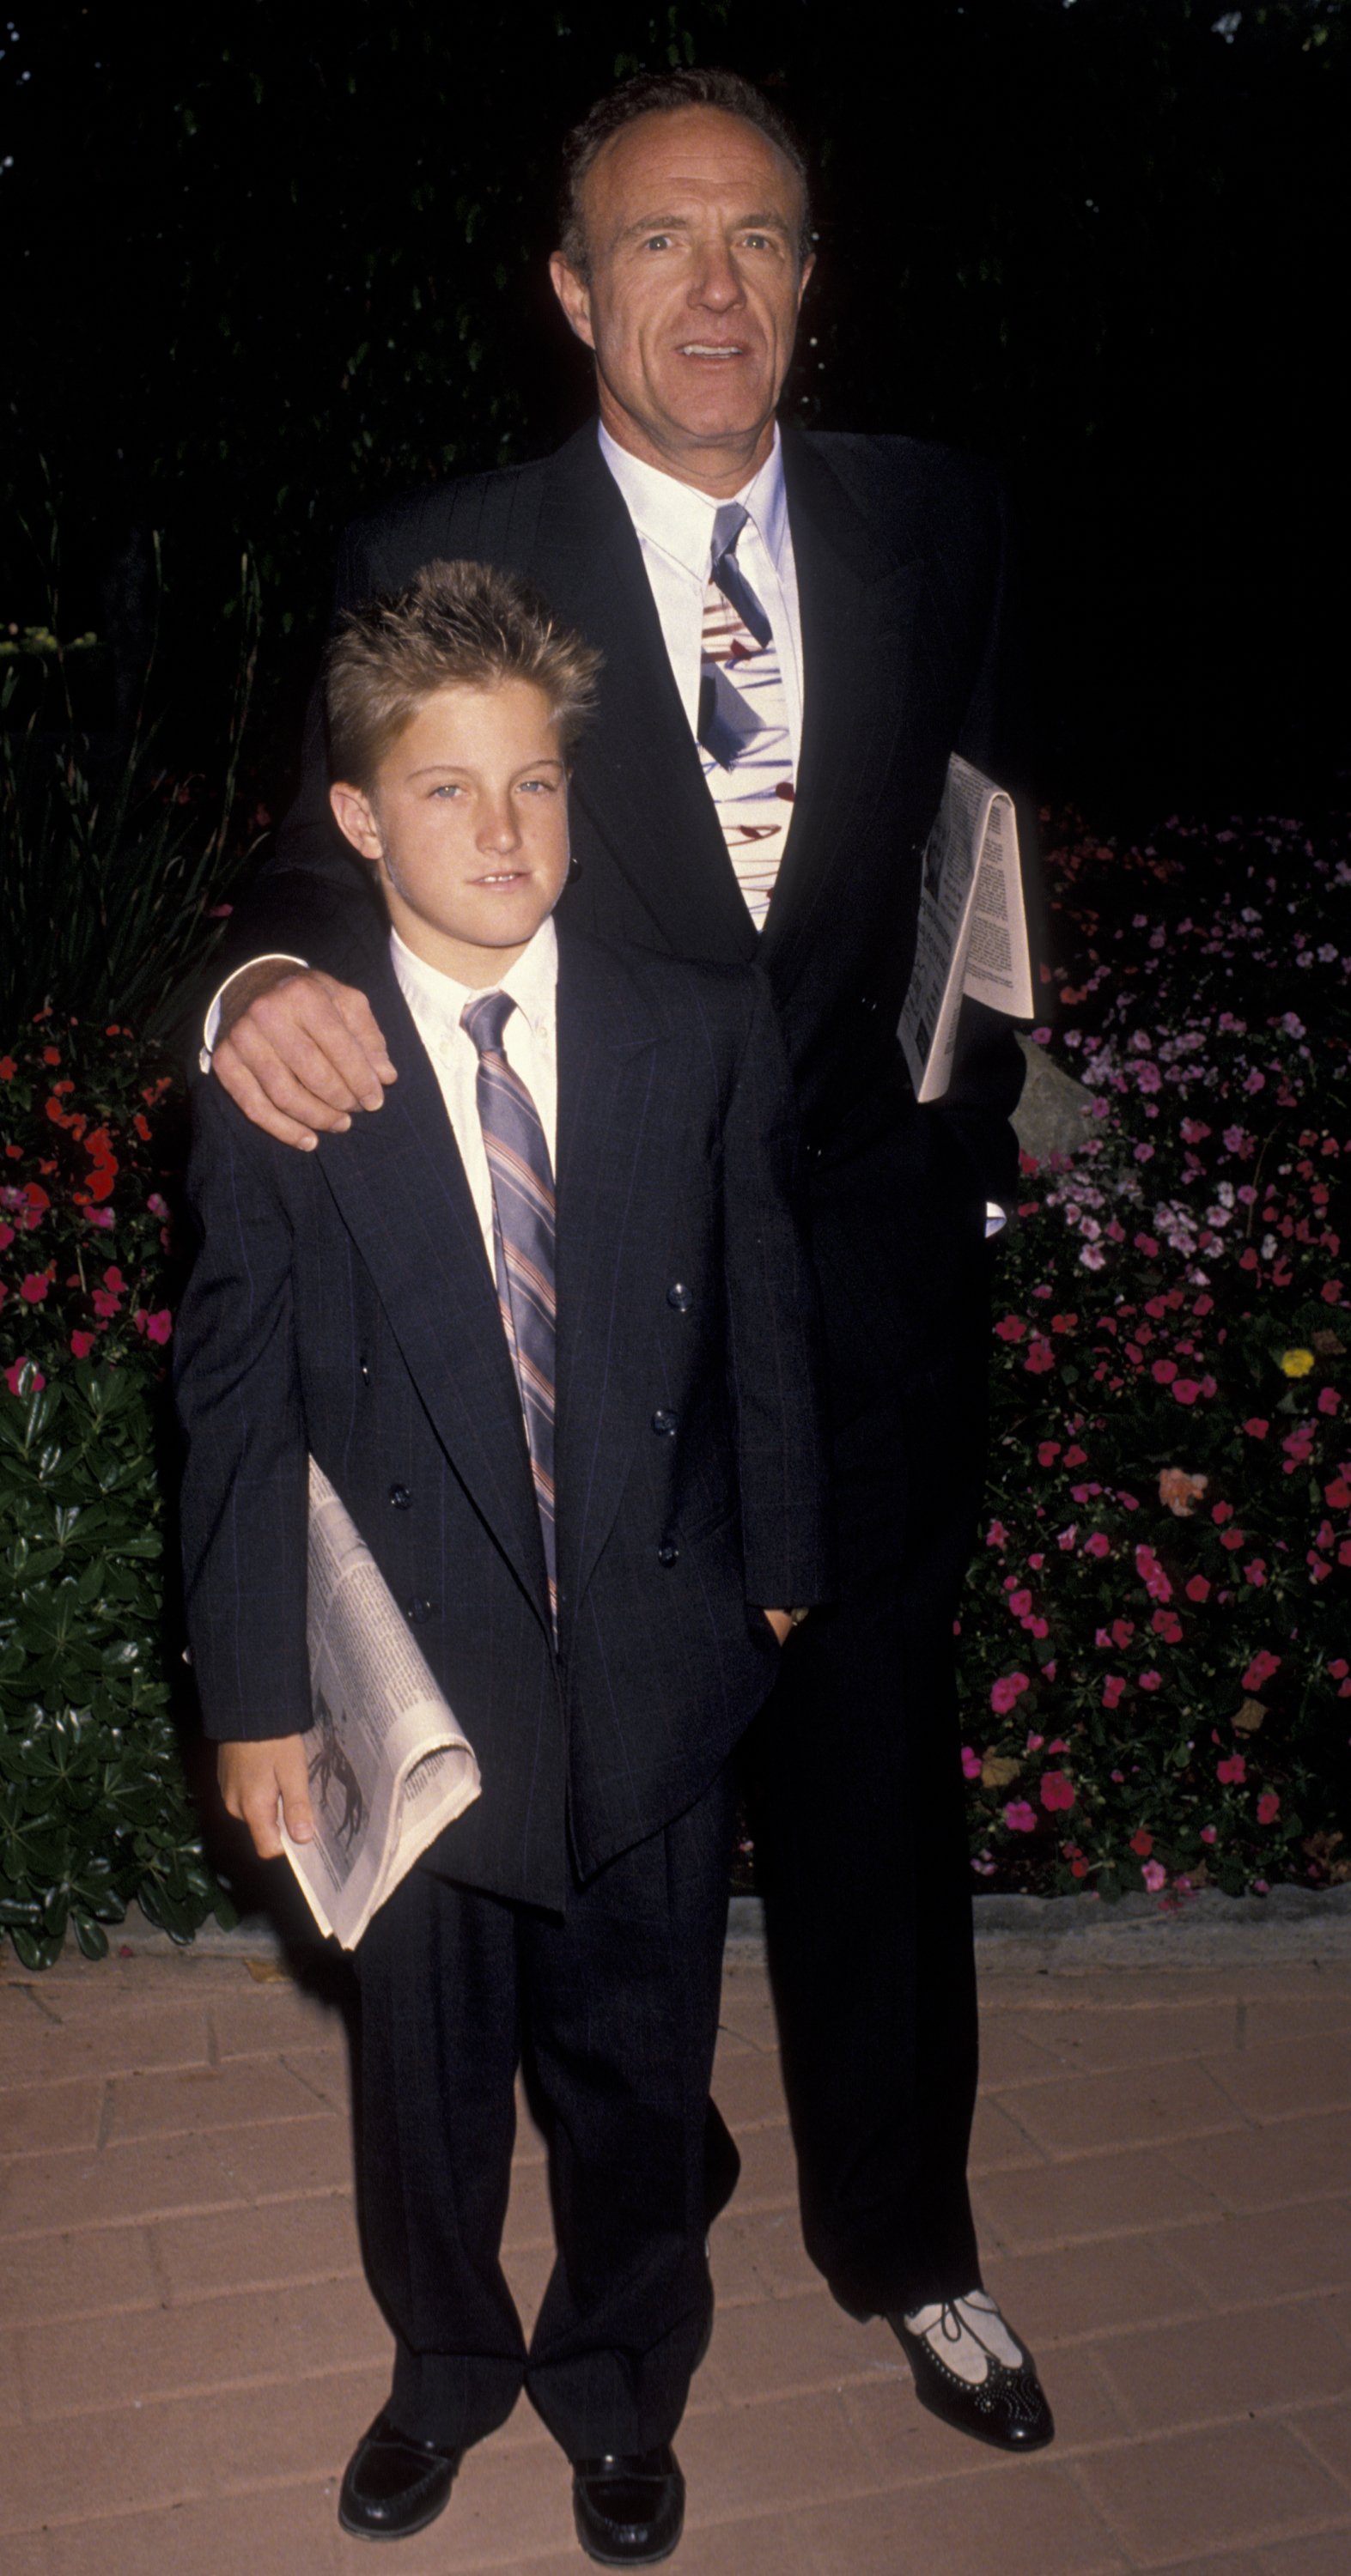 James and Scott Caan at Hollywood Stars Night Benefit Gala on June 22, 1990, in Hollywood, California. | Source: Getty Images